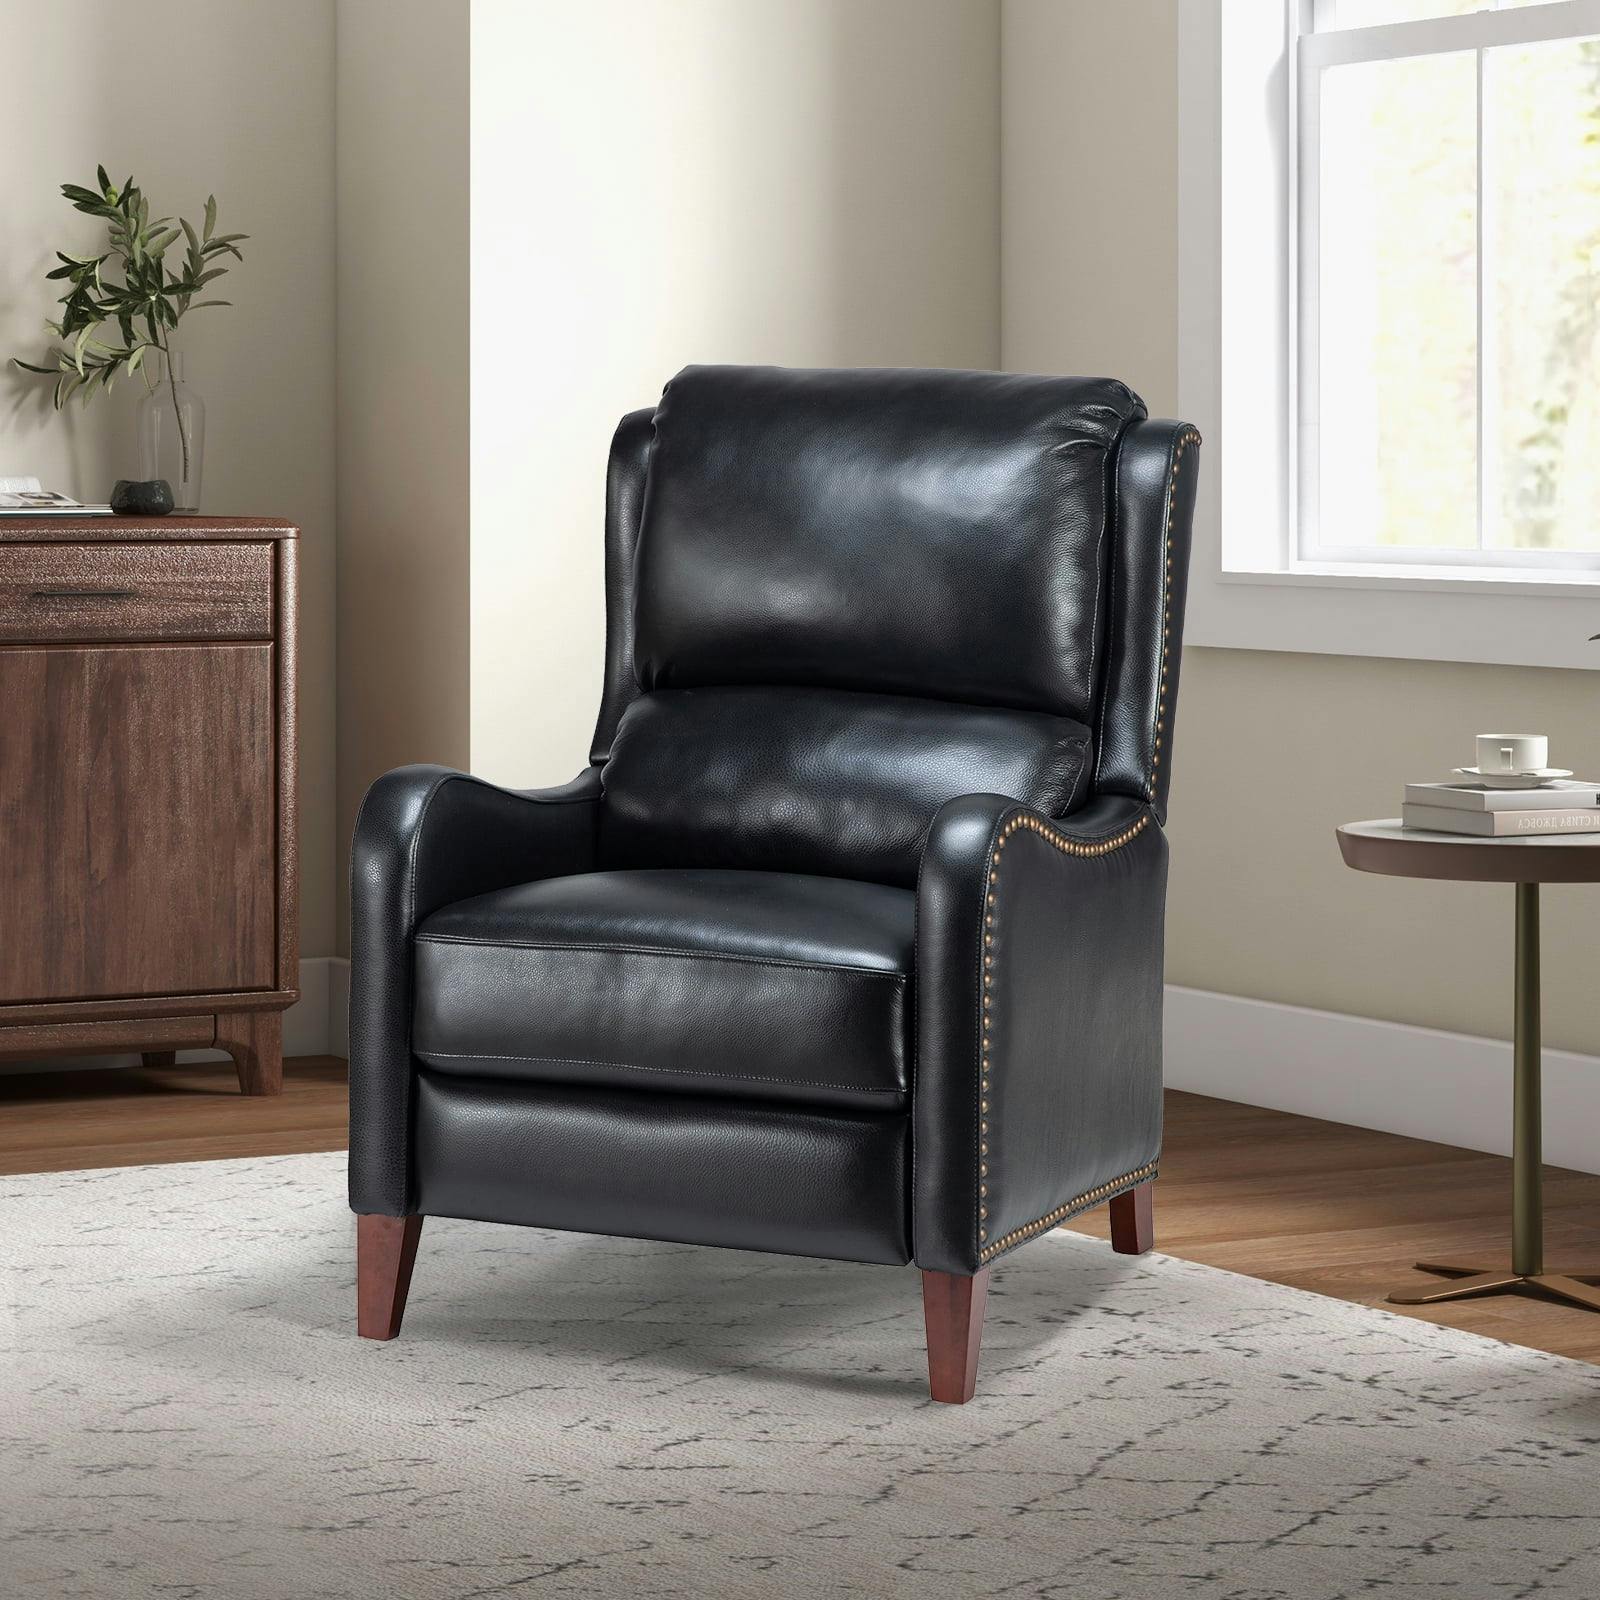 42'' Black Leather Push-Back Recliner with Nailhead Trim